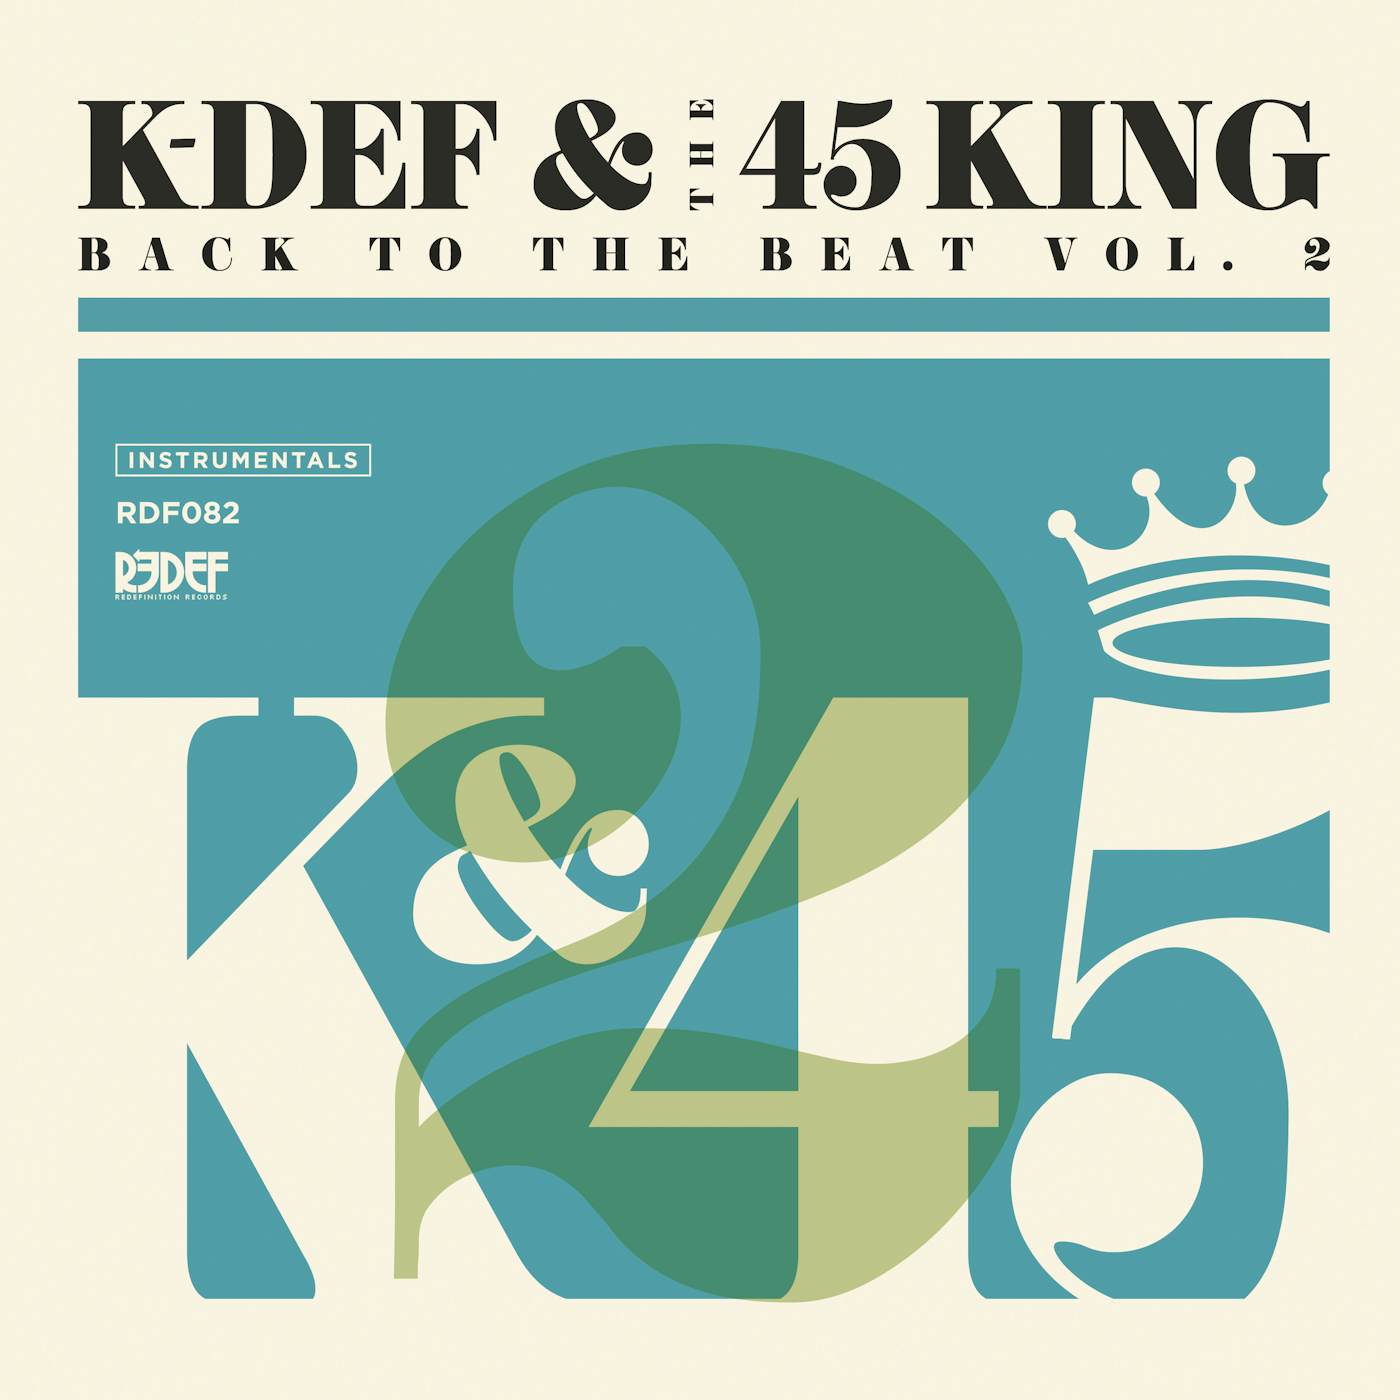 K-Def & 45 King BACK TO THE BEAT 2 Vinyl Record